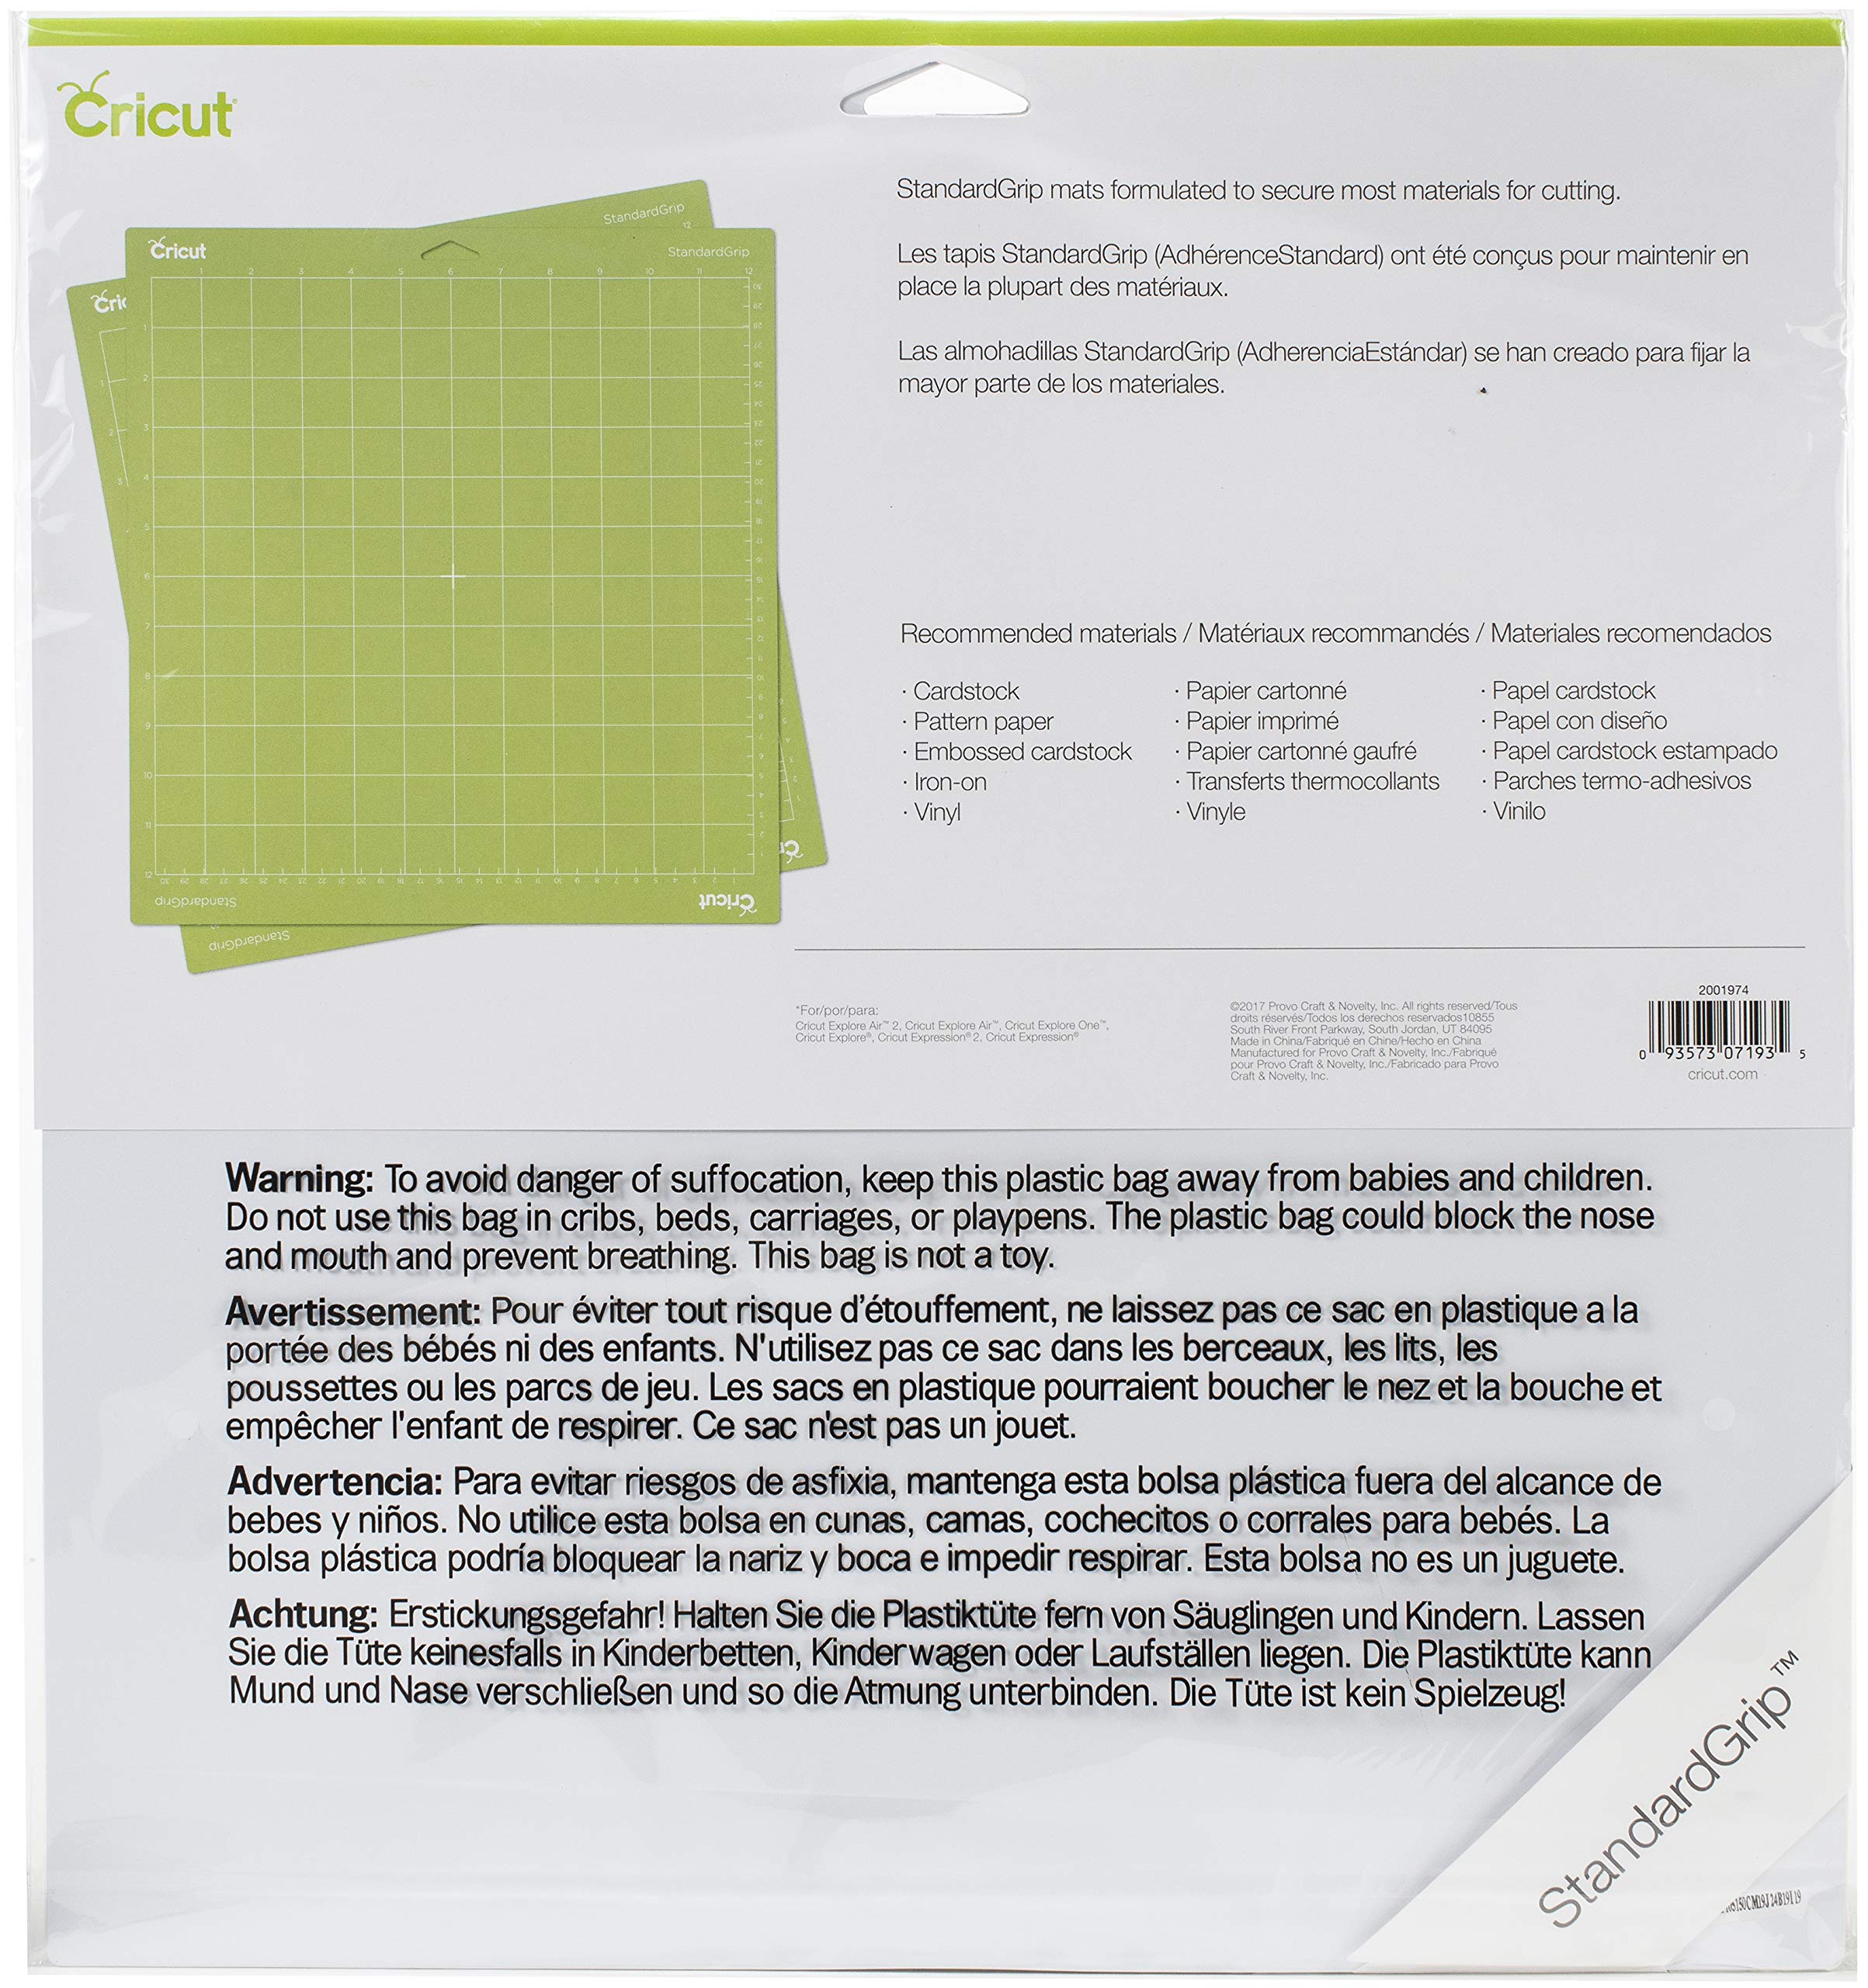 Cricut StandardGrip Machine Mats 12in x 12in, Reusable Cutting Mats for Crafts with Protective Film,Use with Cardstock, Iron On, Vinyl and More, Compatible with Cricut Explore & Maker (2 Count) ,Green